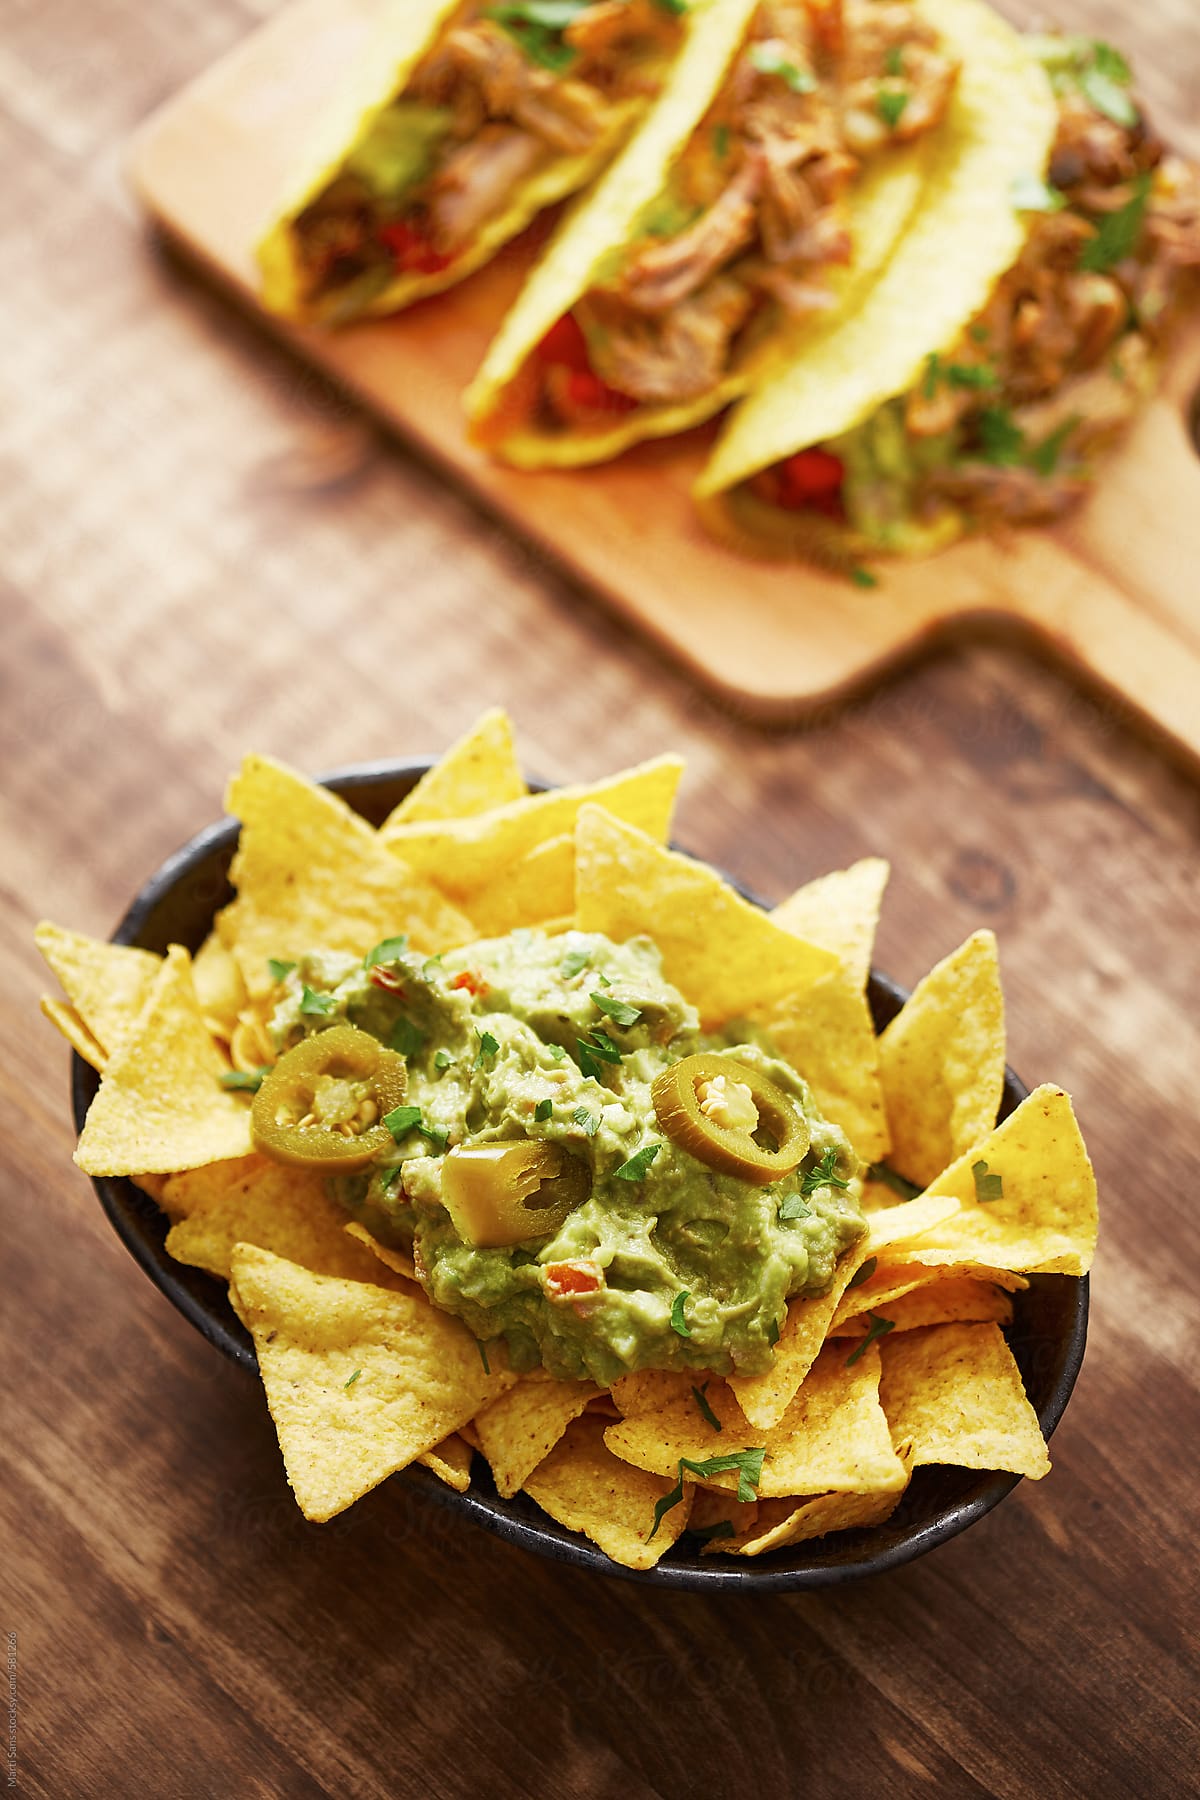 Tortilla chips with guacamole sauce, tacos